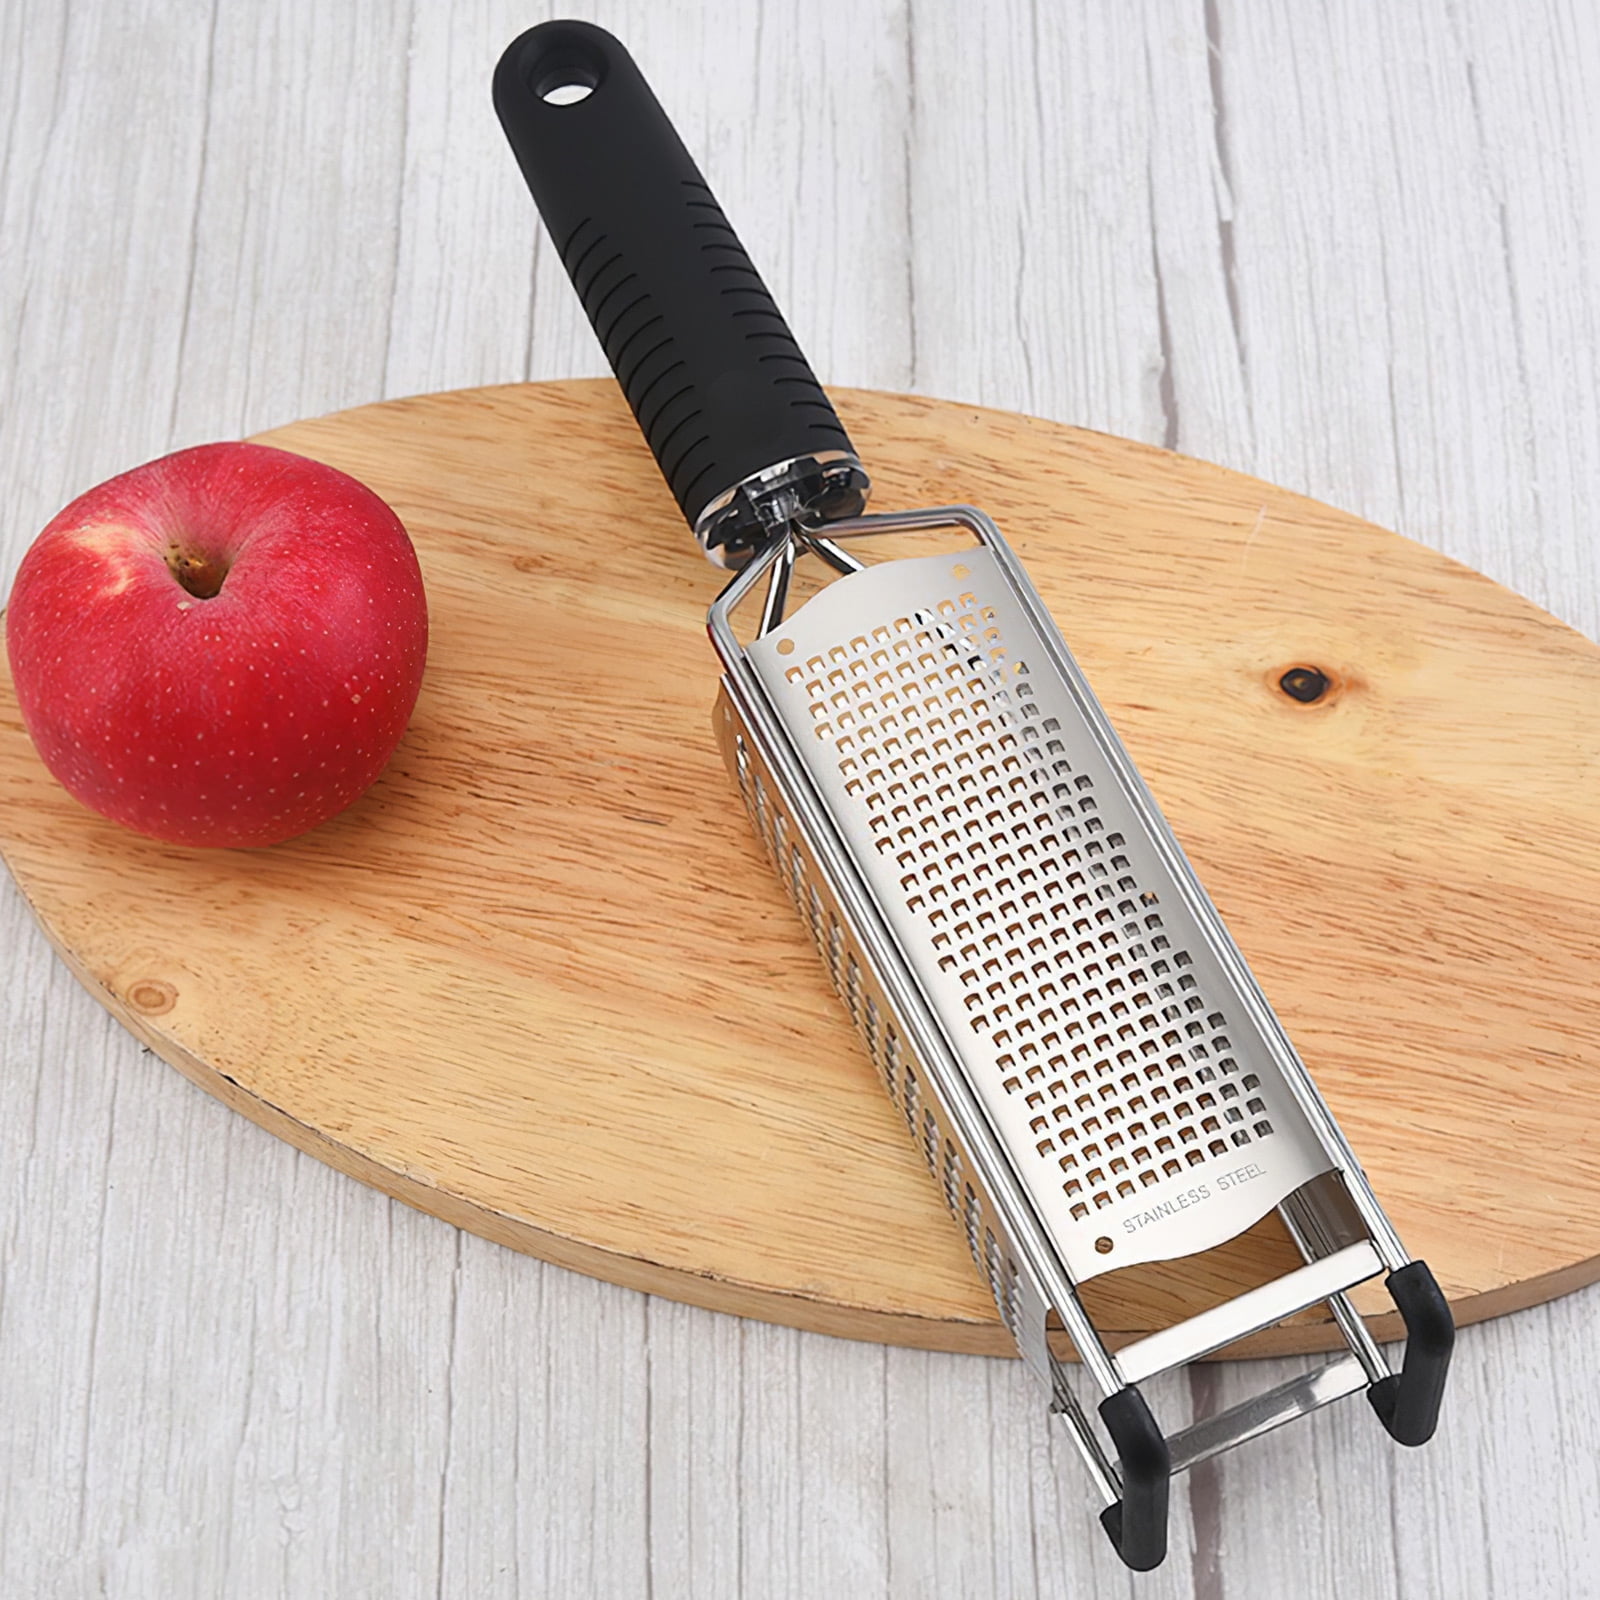 Tohuu Cheese Grater with Handle Handheld Stainless Steel Cheese